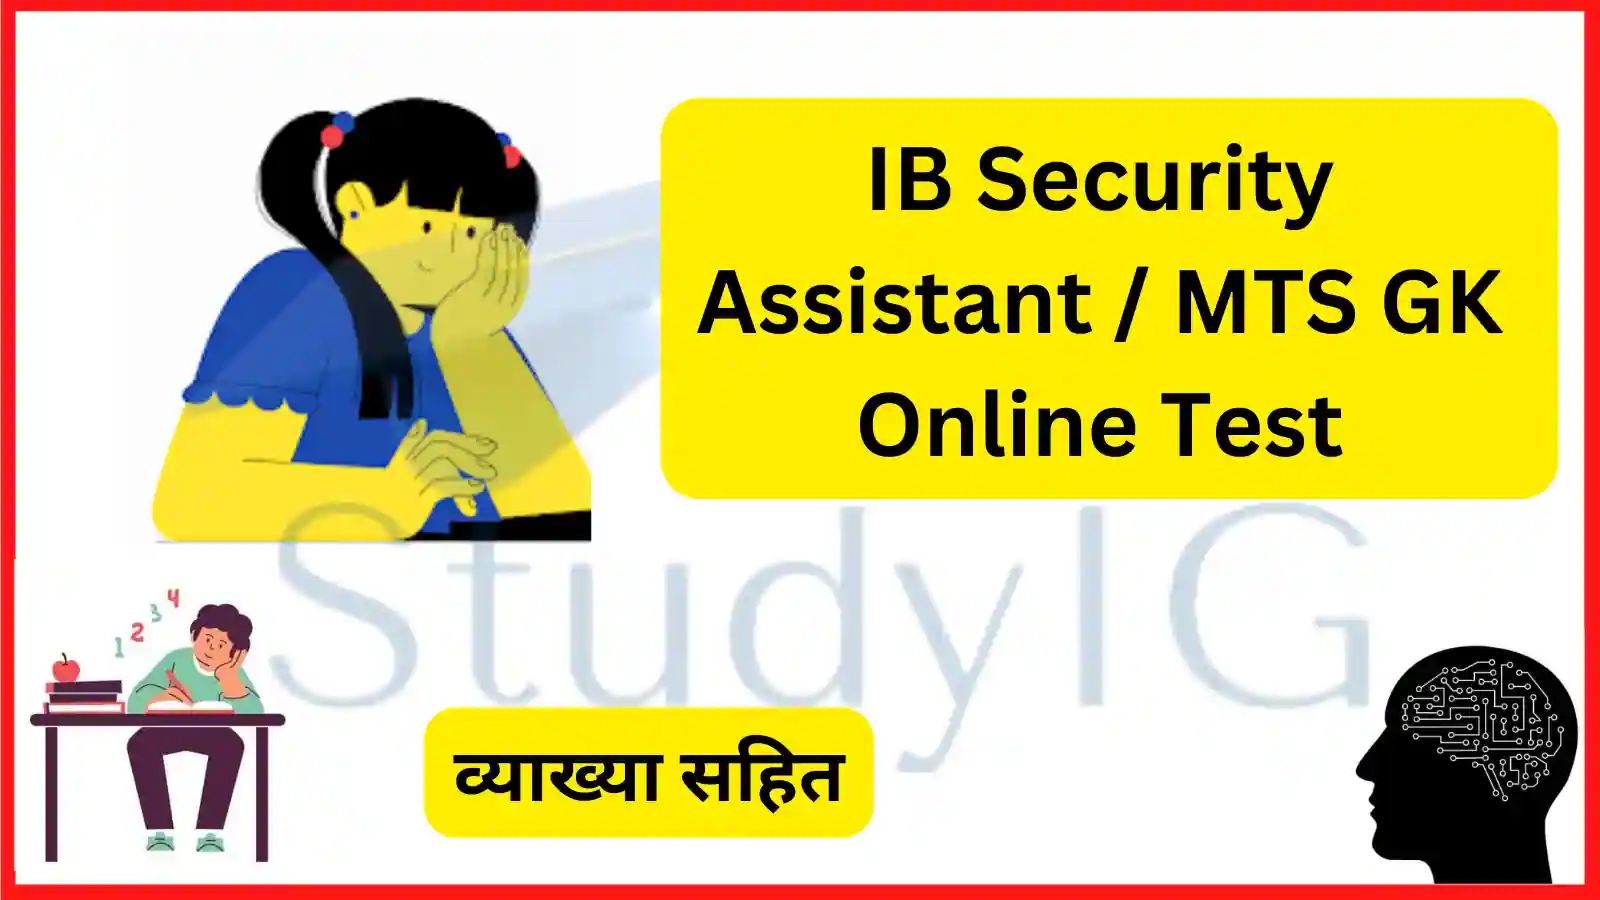 IB Security Assistant / MTS GK Online Test in Hindi